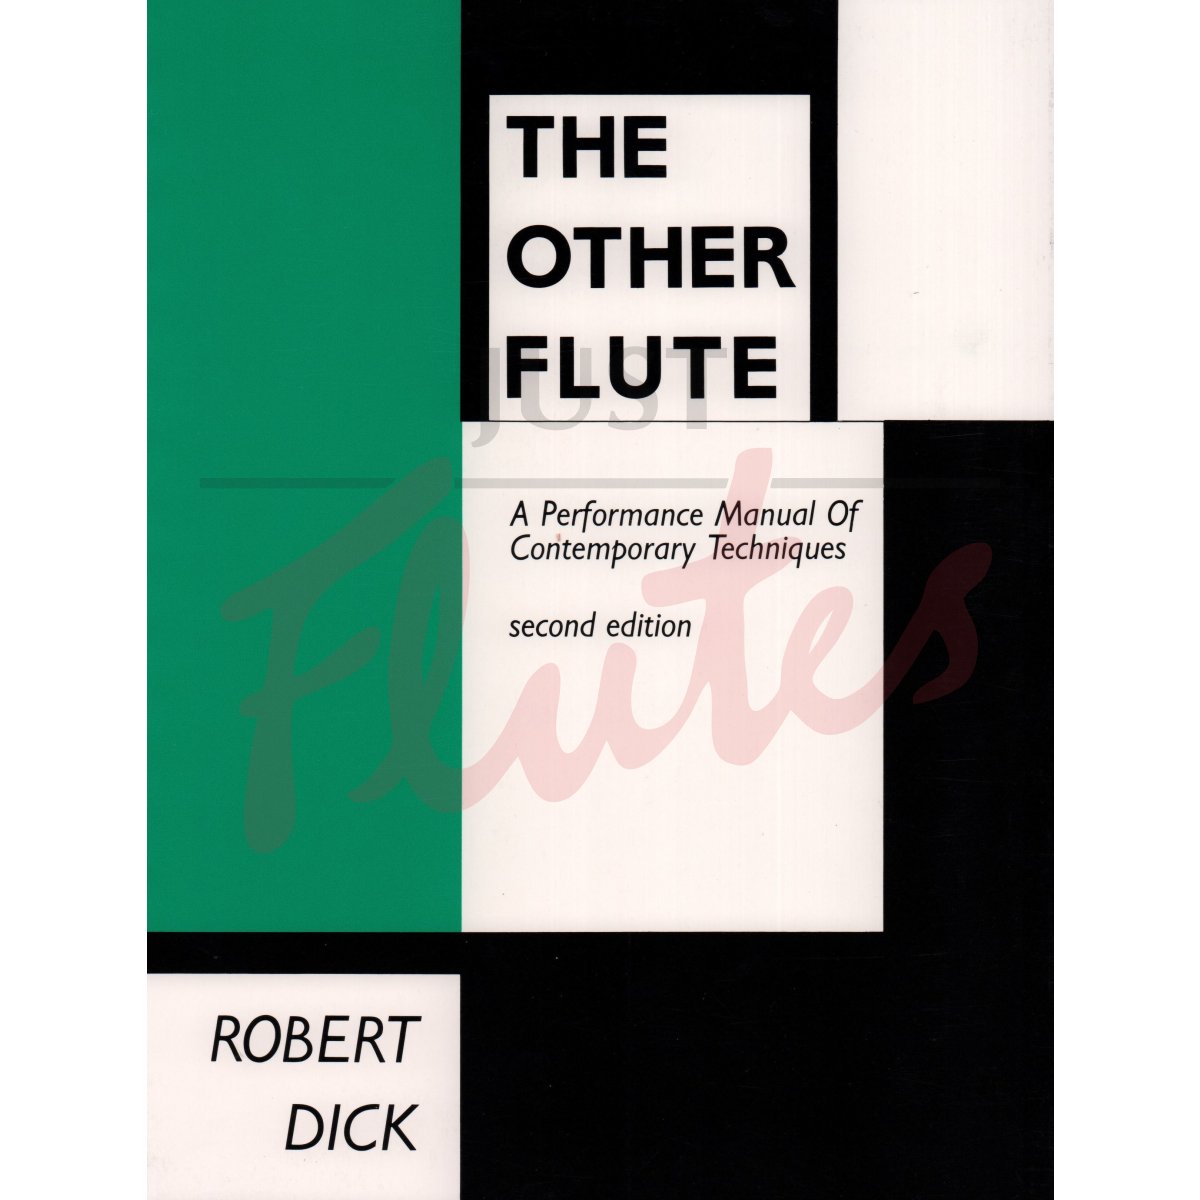 The Other Flute: A Performance Manual of Contemporary Techniques